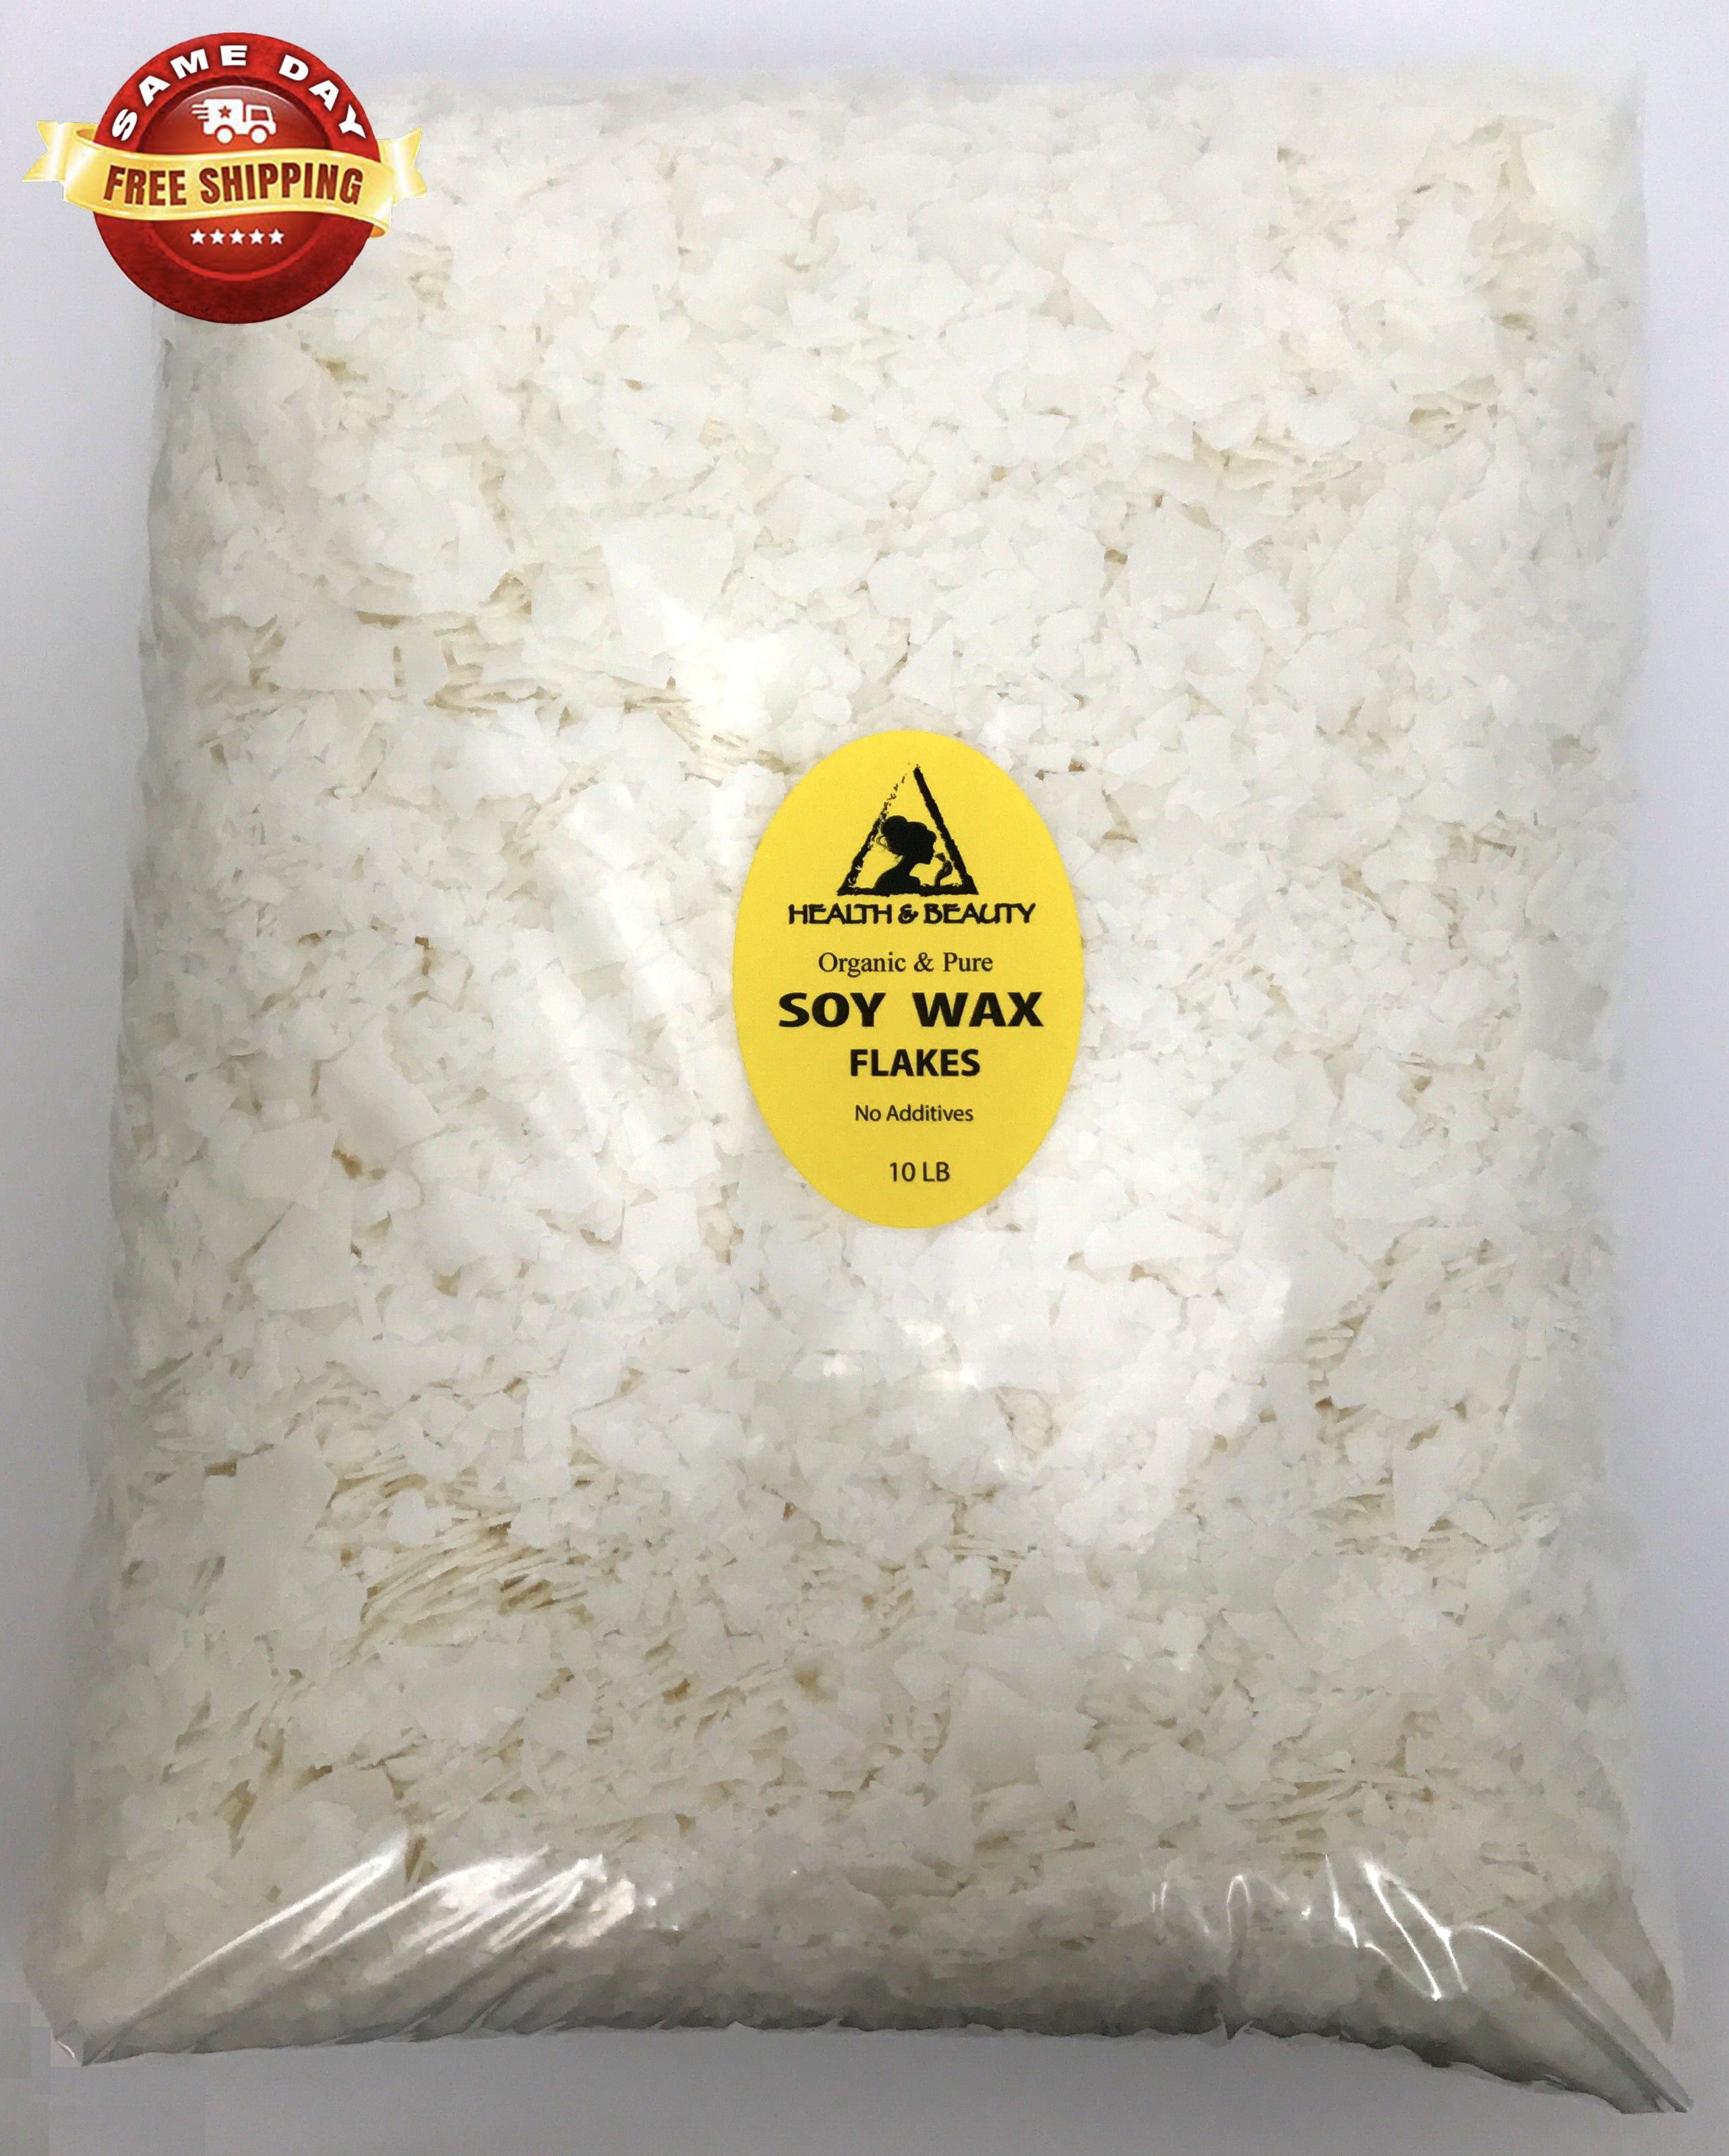 GOLDEN SOY AKOSOY WAX FLAKES ORGANIC VEGAN PASTILLES FOR CANDLE MAKING  NATURAL 100% PURE 10 LB 